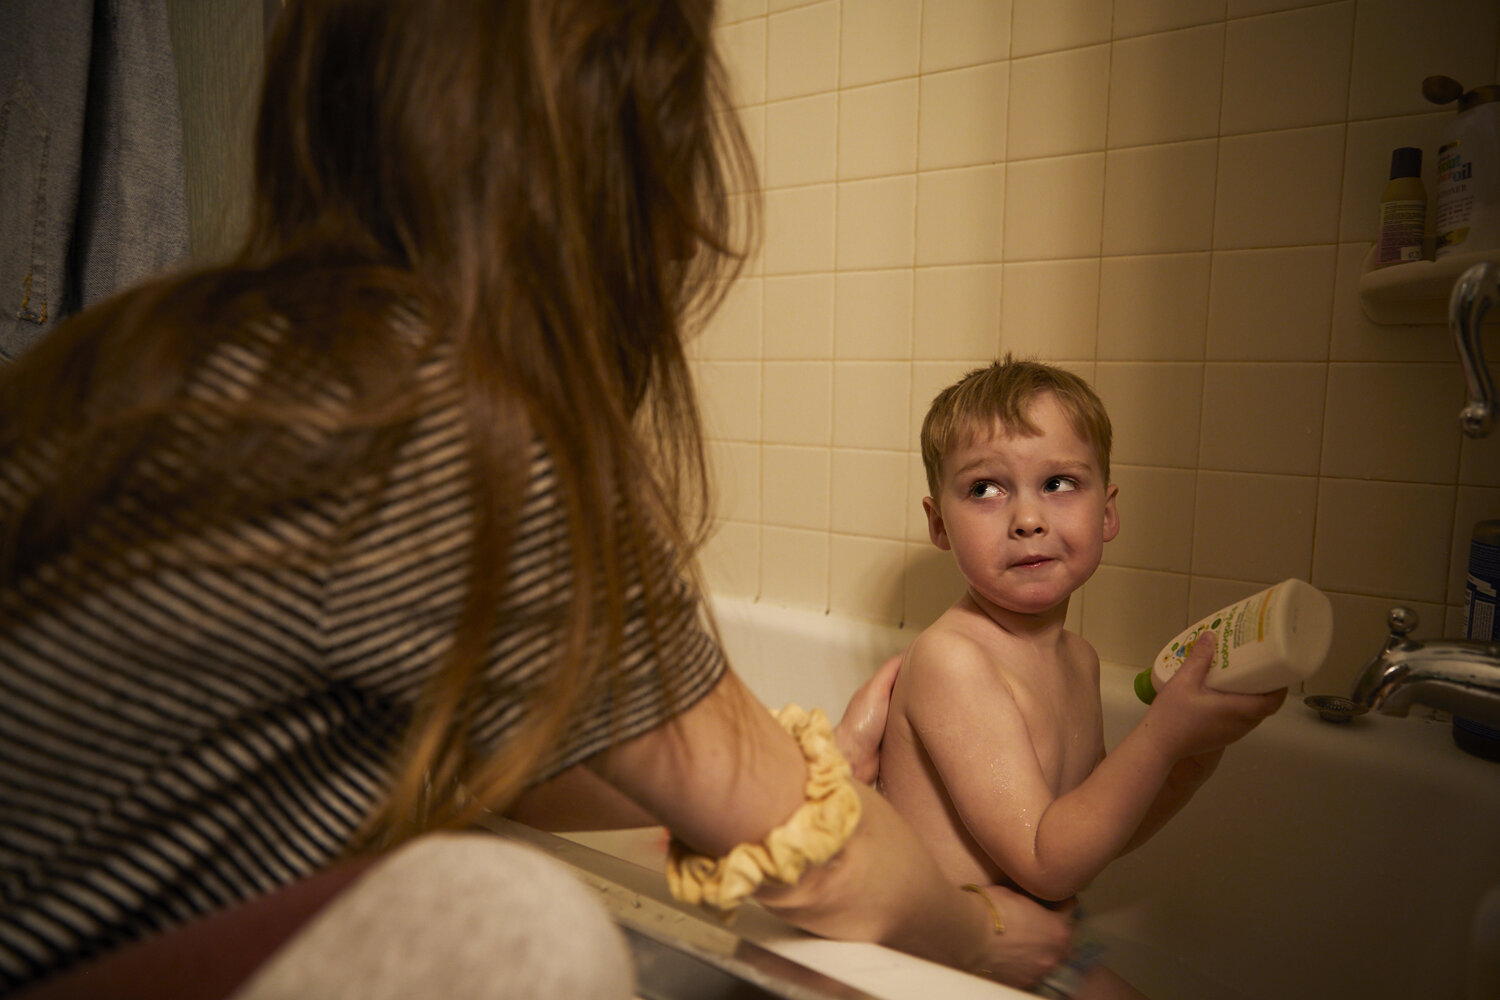  Kathleen  bathes her 3 year old son Gabriel, while explaining why he shouldn’t squirt the entire bottle of soap into the tub.  Due to the Covid-19 pandemic, Kathleen has no childcare help, as even daycares were closed. She feels intensely bad for he